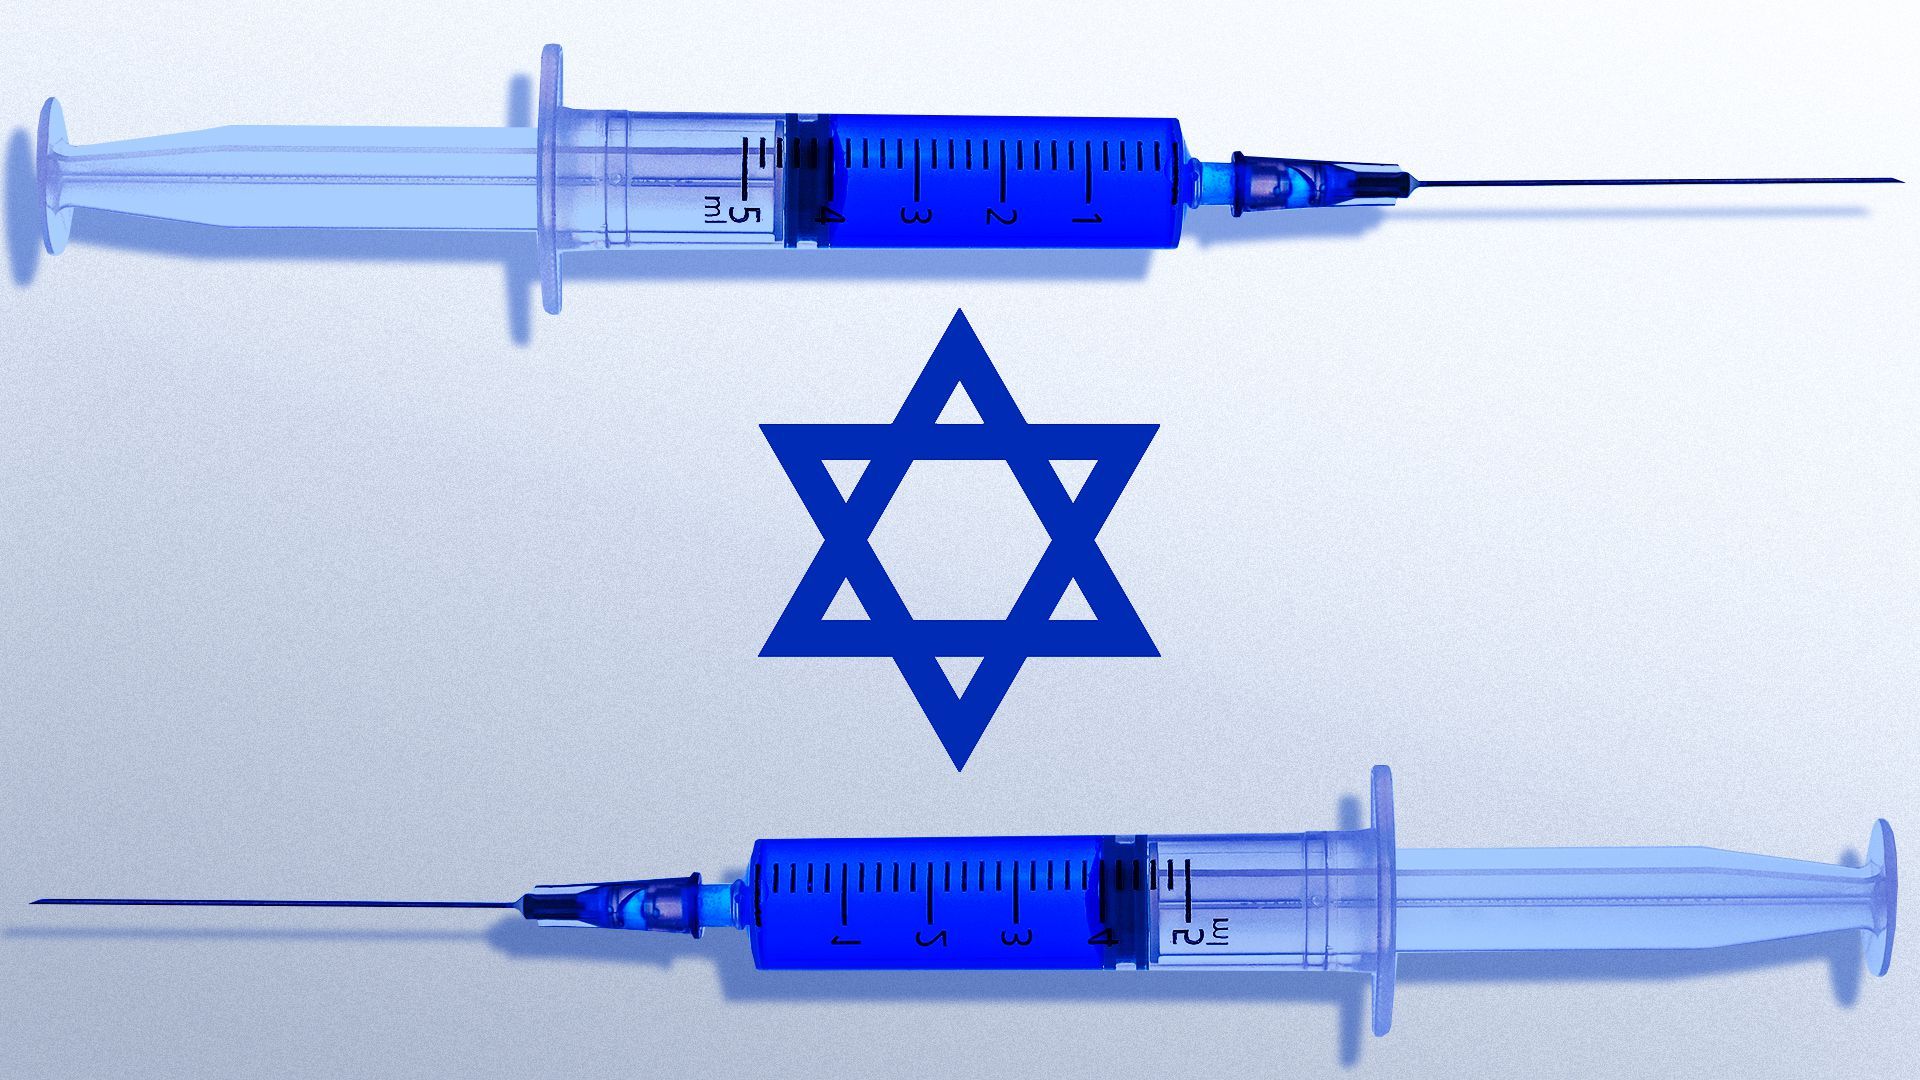 Illustration of an Israel flag made with syringes for the top and bottom cars